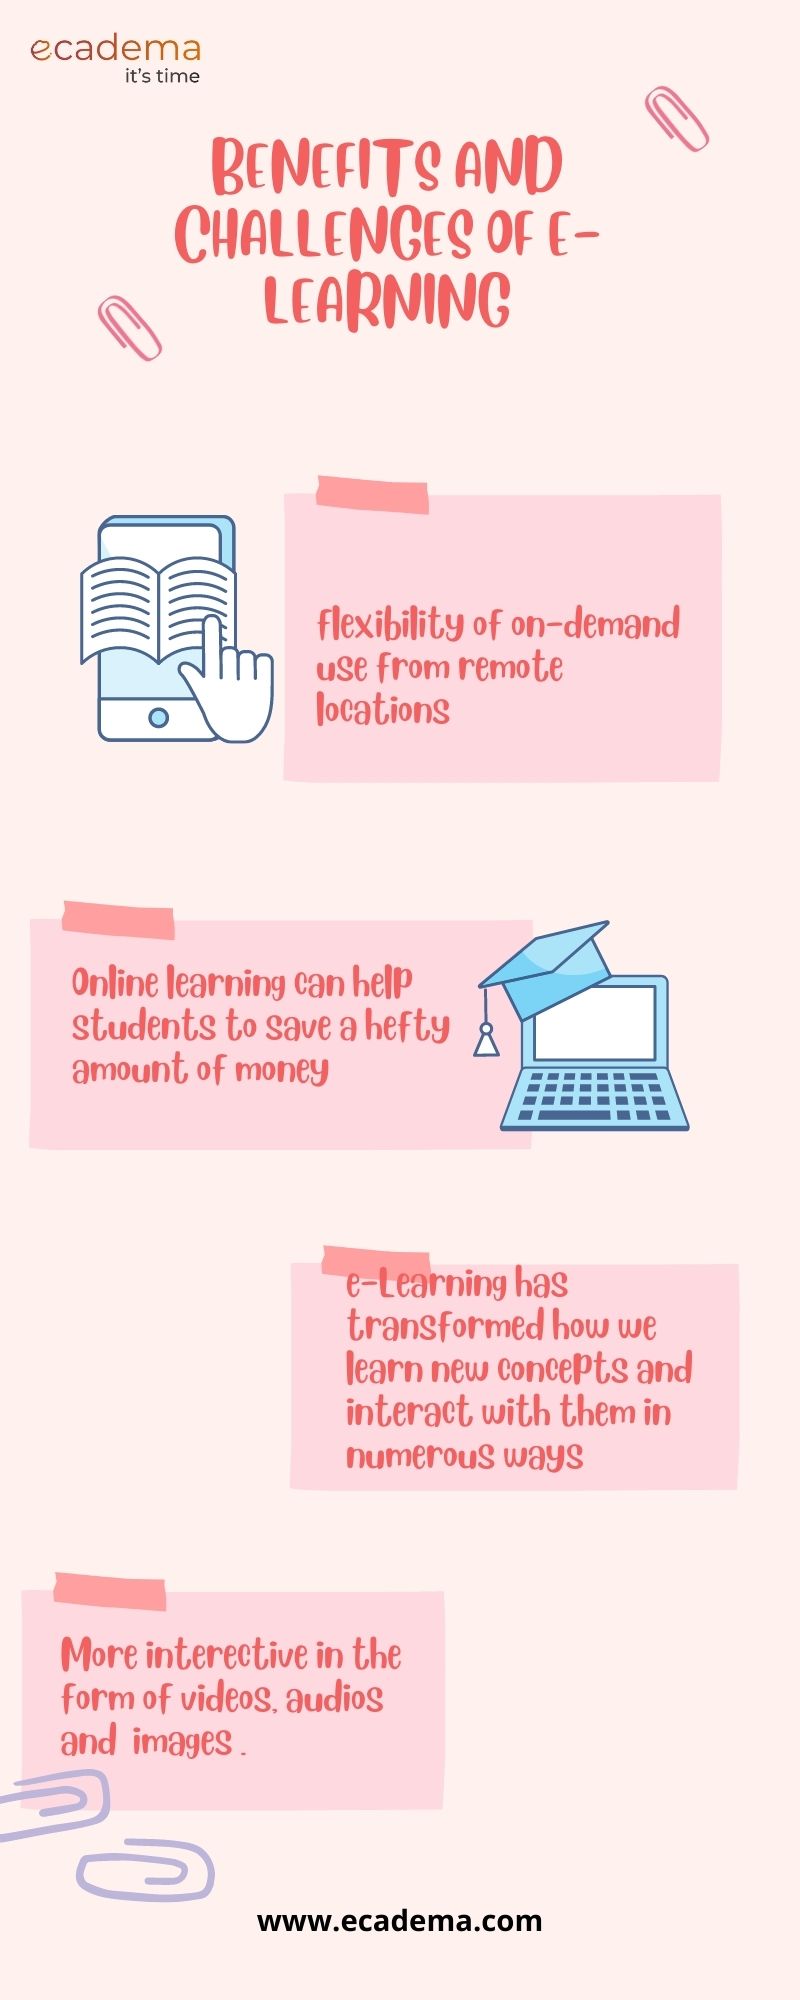 Benefits And Challenges Of E-learning.jpg  by ecadema